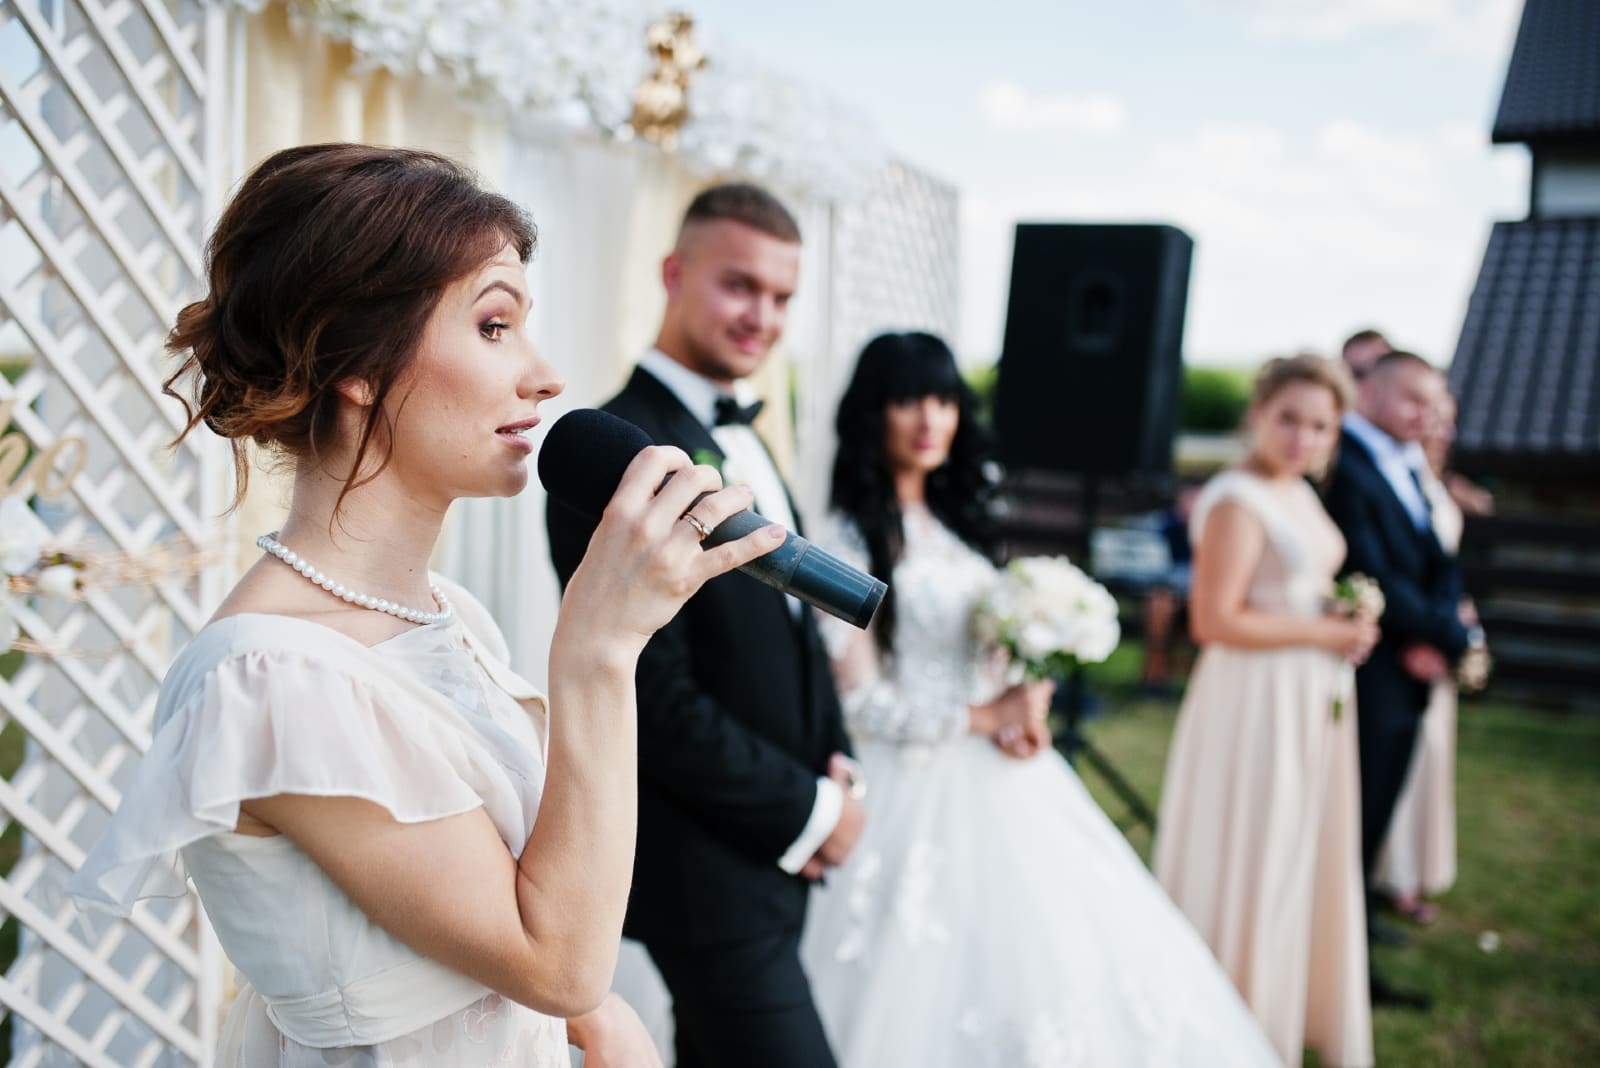 10 Best Maid Of Honor Speech Examples (+15 Pro Tips)